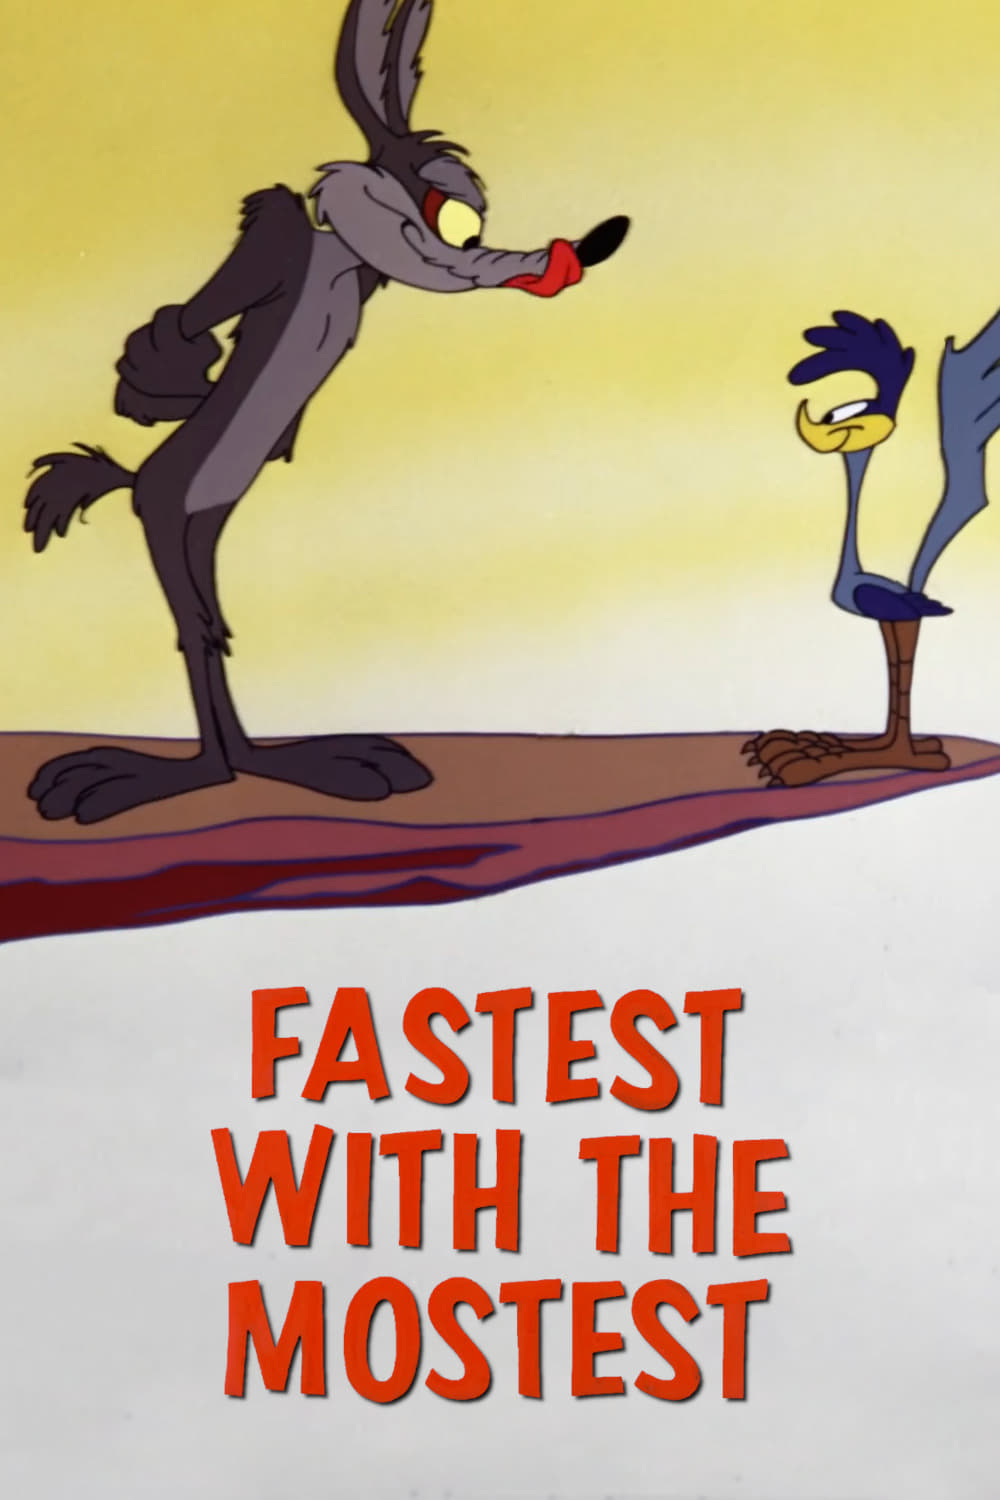 Fastest with the Mostest (1960)